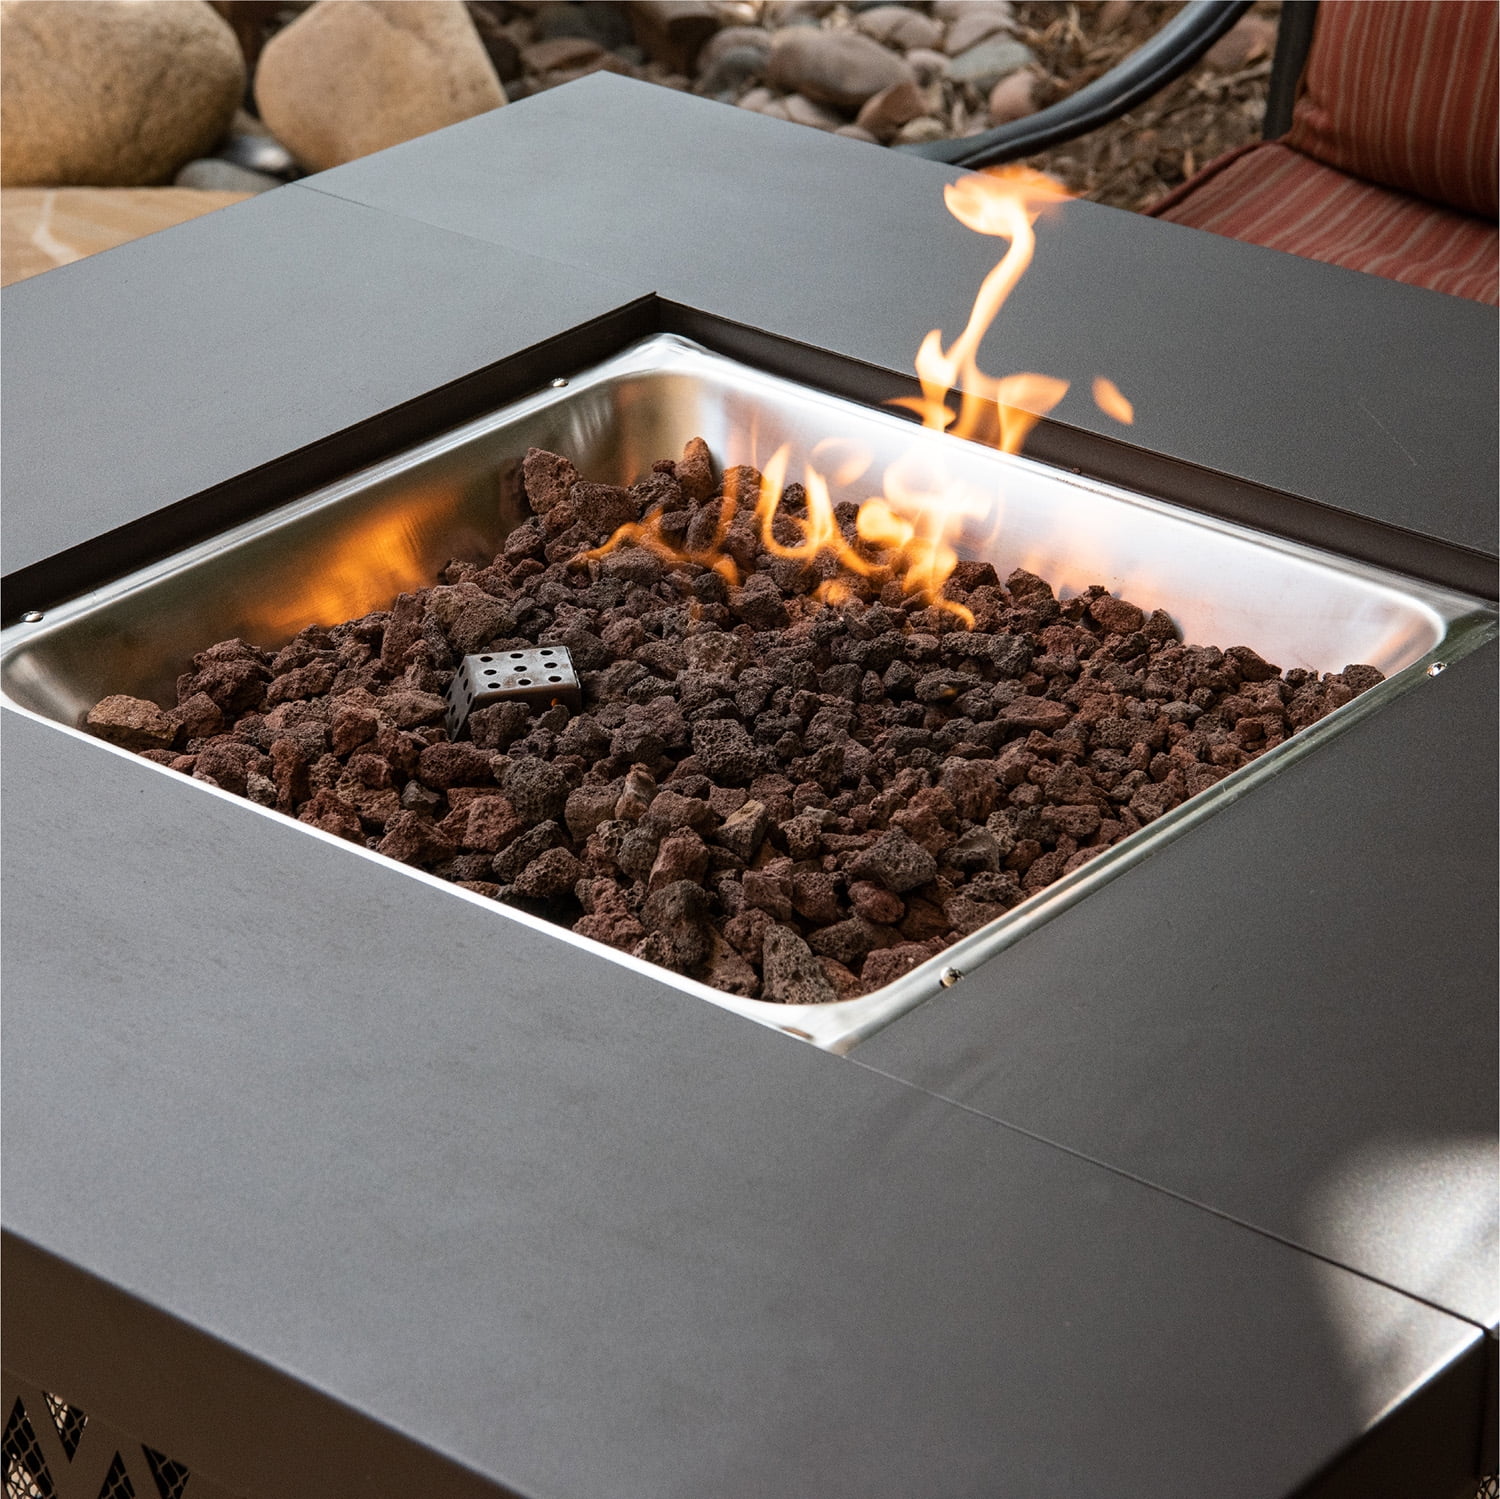 Volcanic Lava Rock For Fire Pits, Can You Use Landscape Lava Rock In A Fire Pit